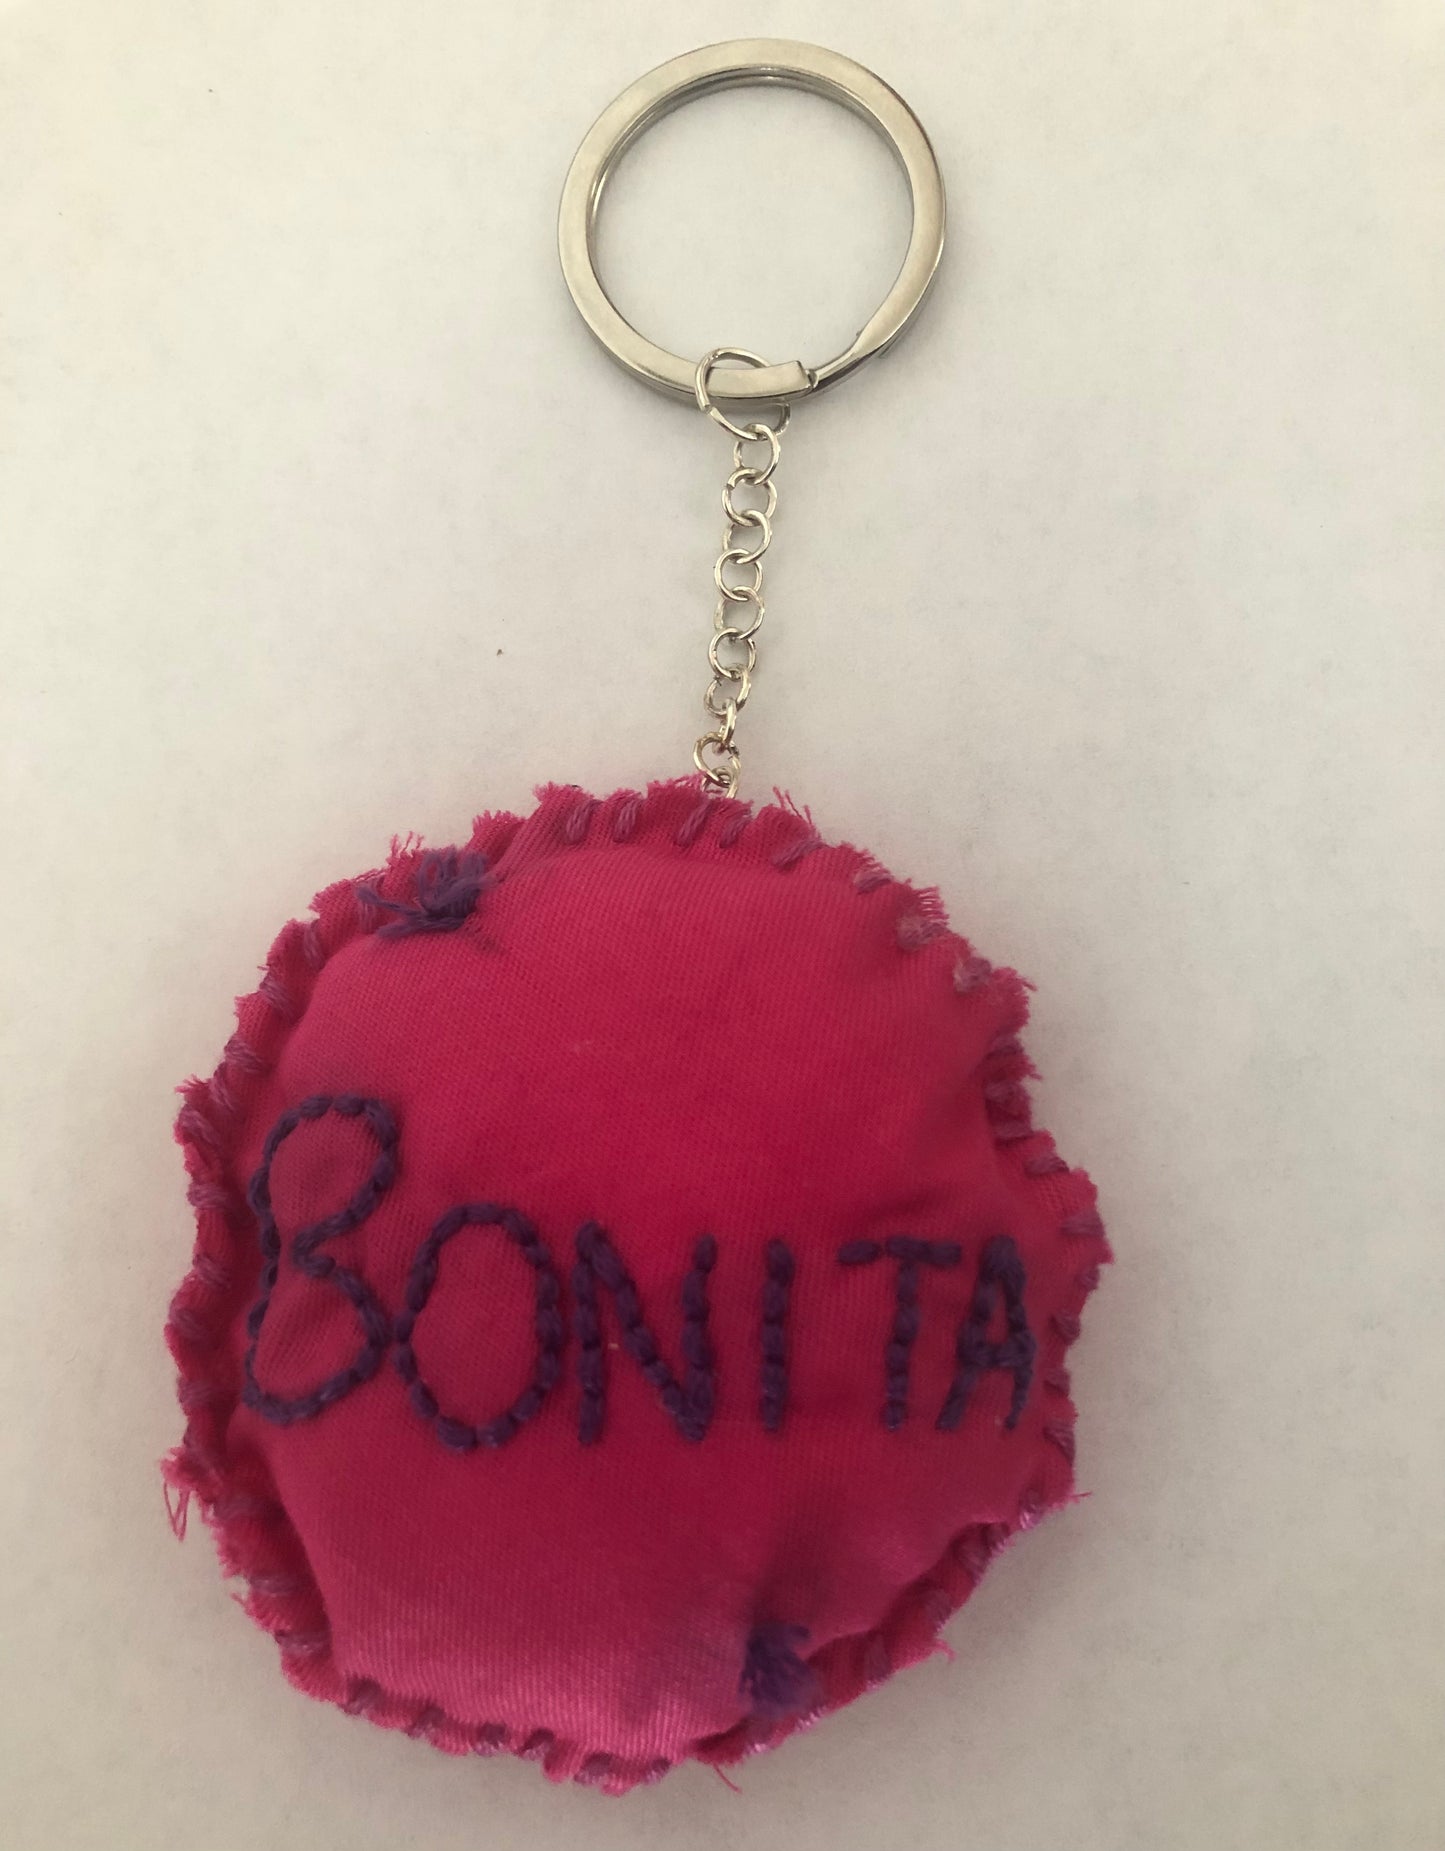 Mini Pillow Embroidered and Empowering Keychains